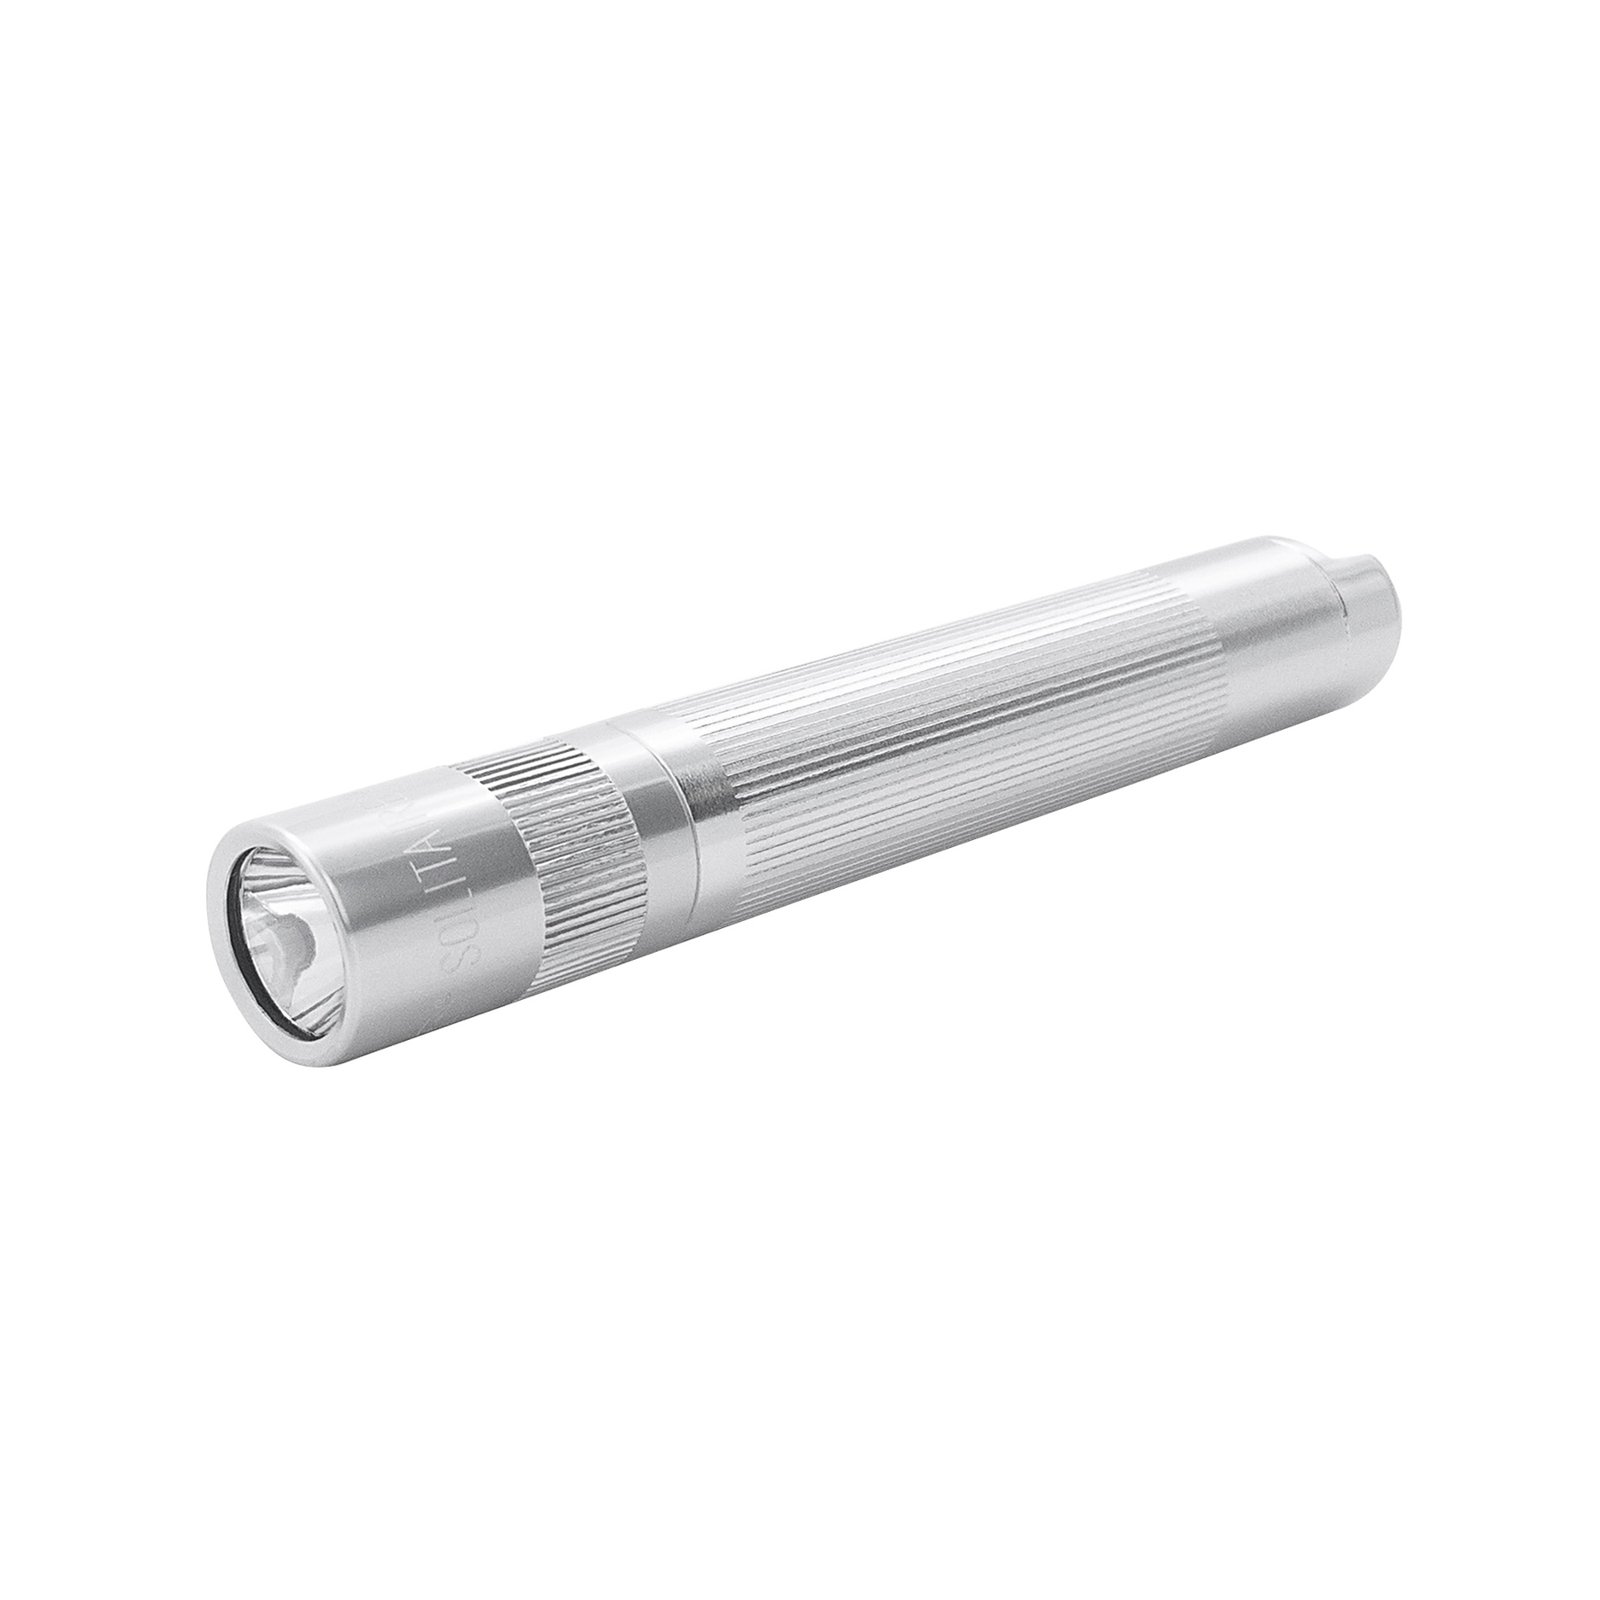 Maglite LED zaklamp Solitaire, 1 Cell AAA, zilver